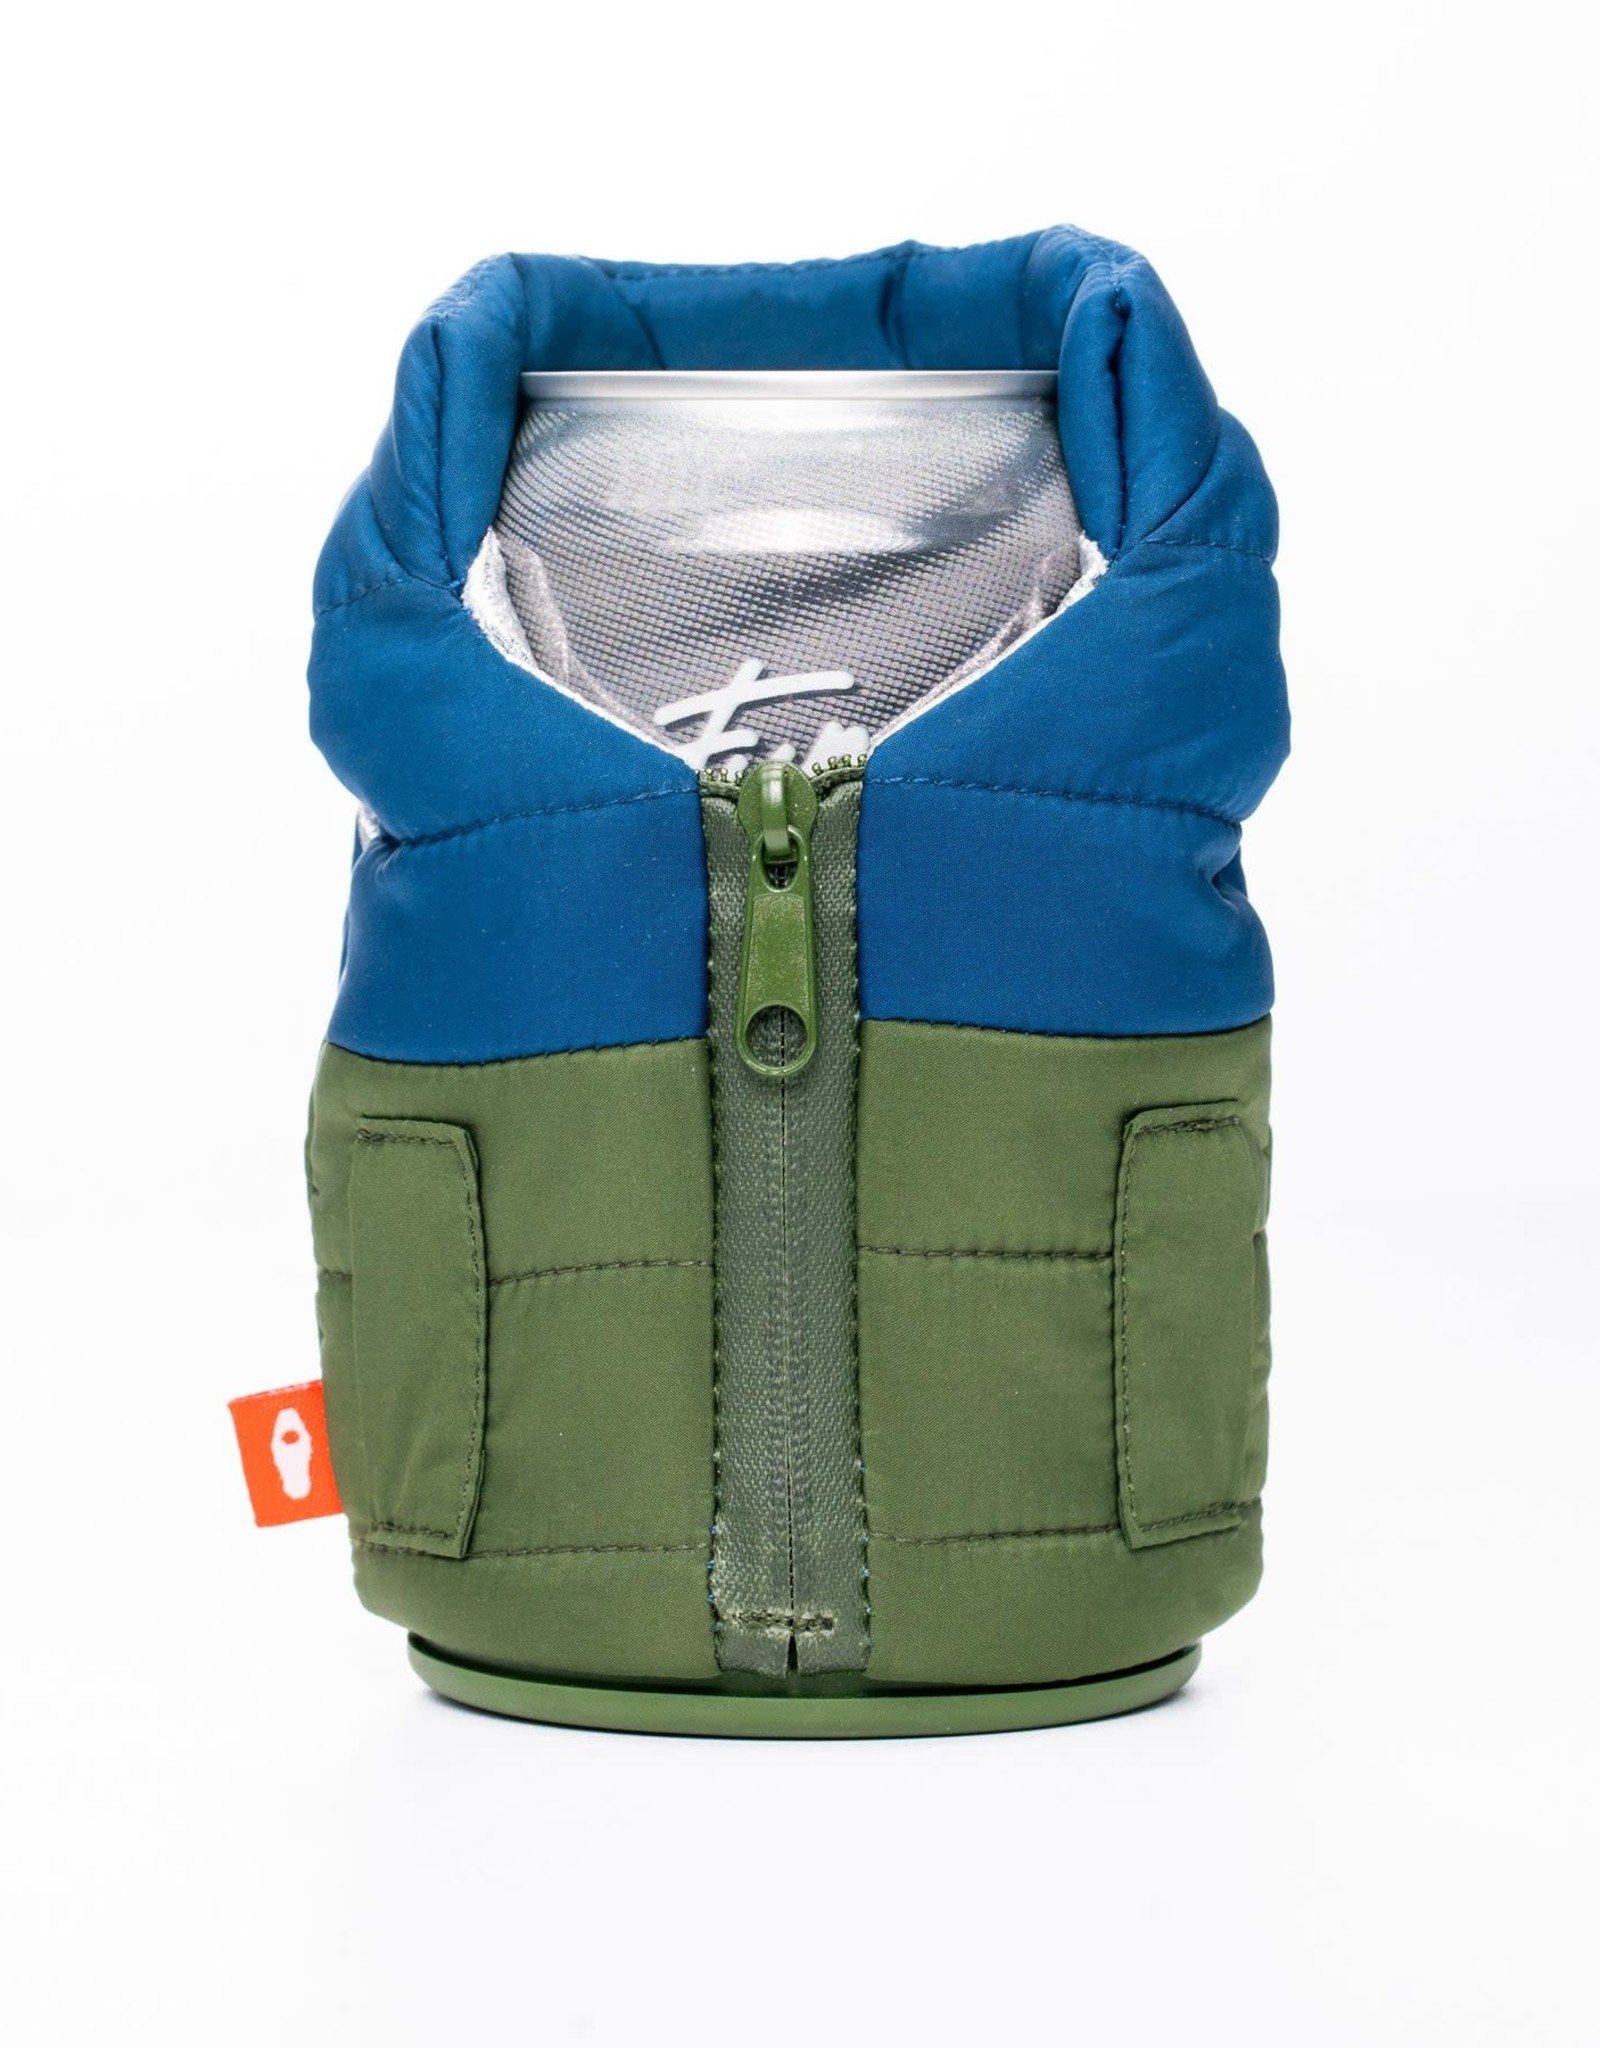 Puffin The Puffy Vest - Olive / Blue